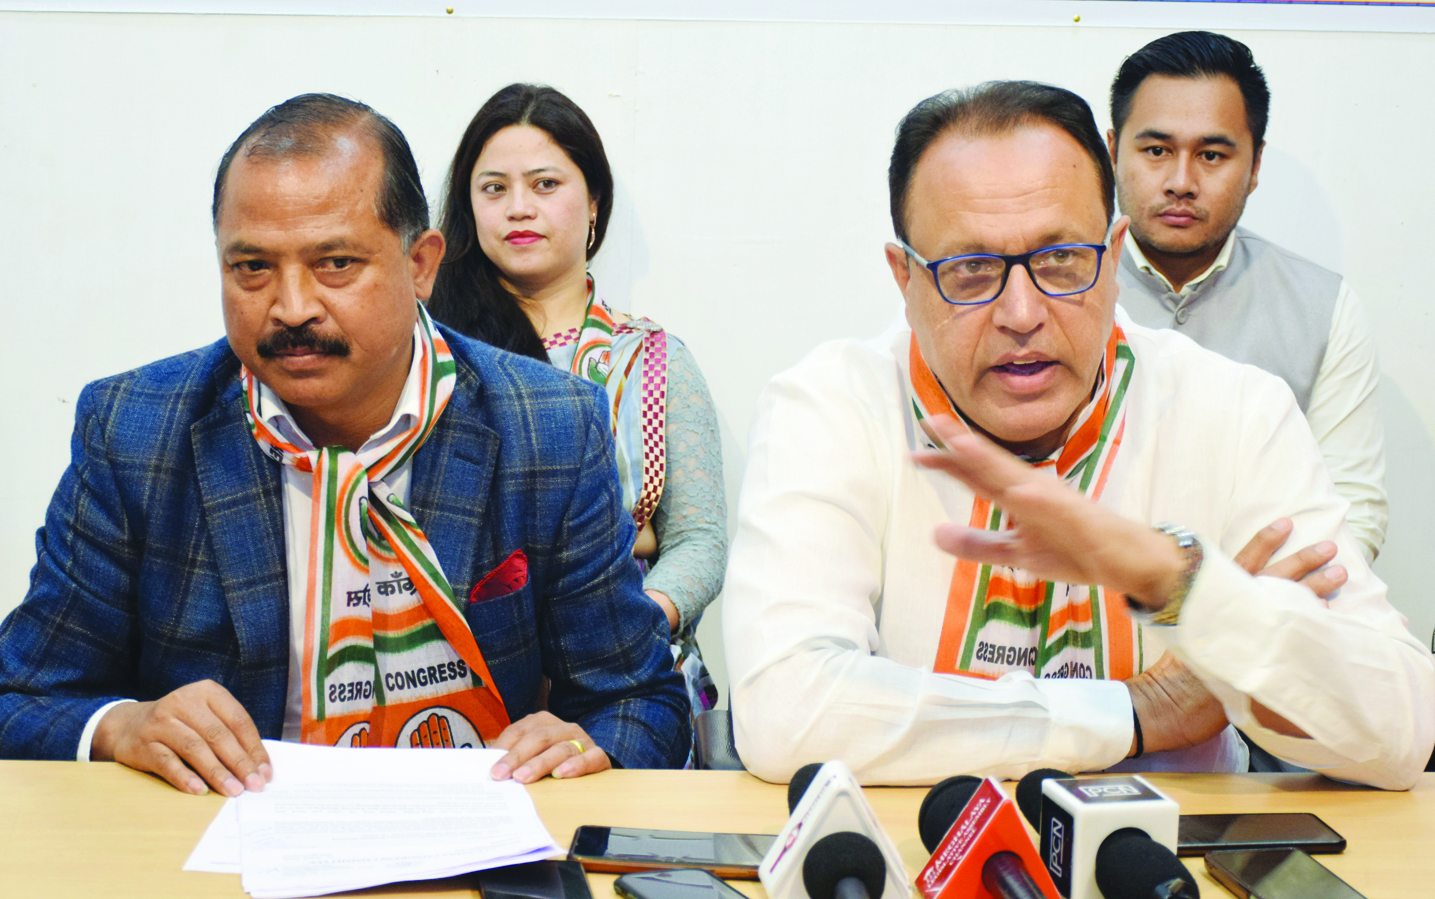 AICC leader Manish Chatrath confident of winning both Shillong and Tura parliamentary seats